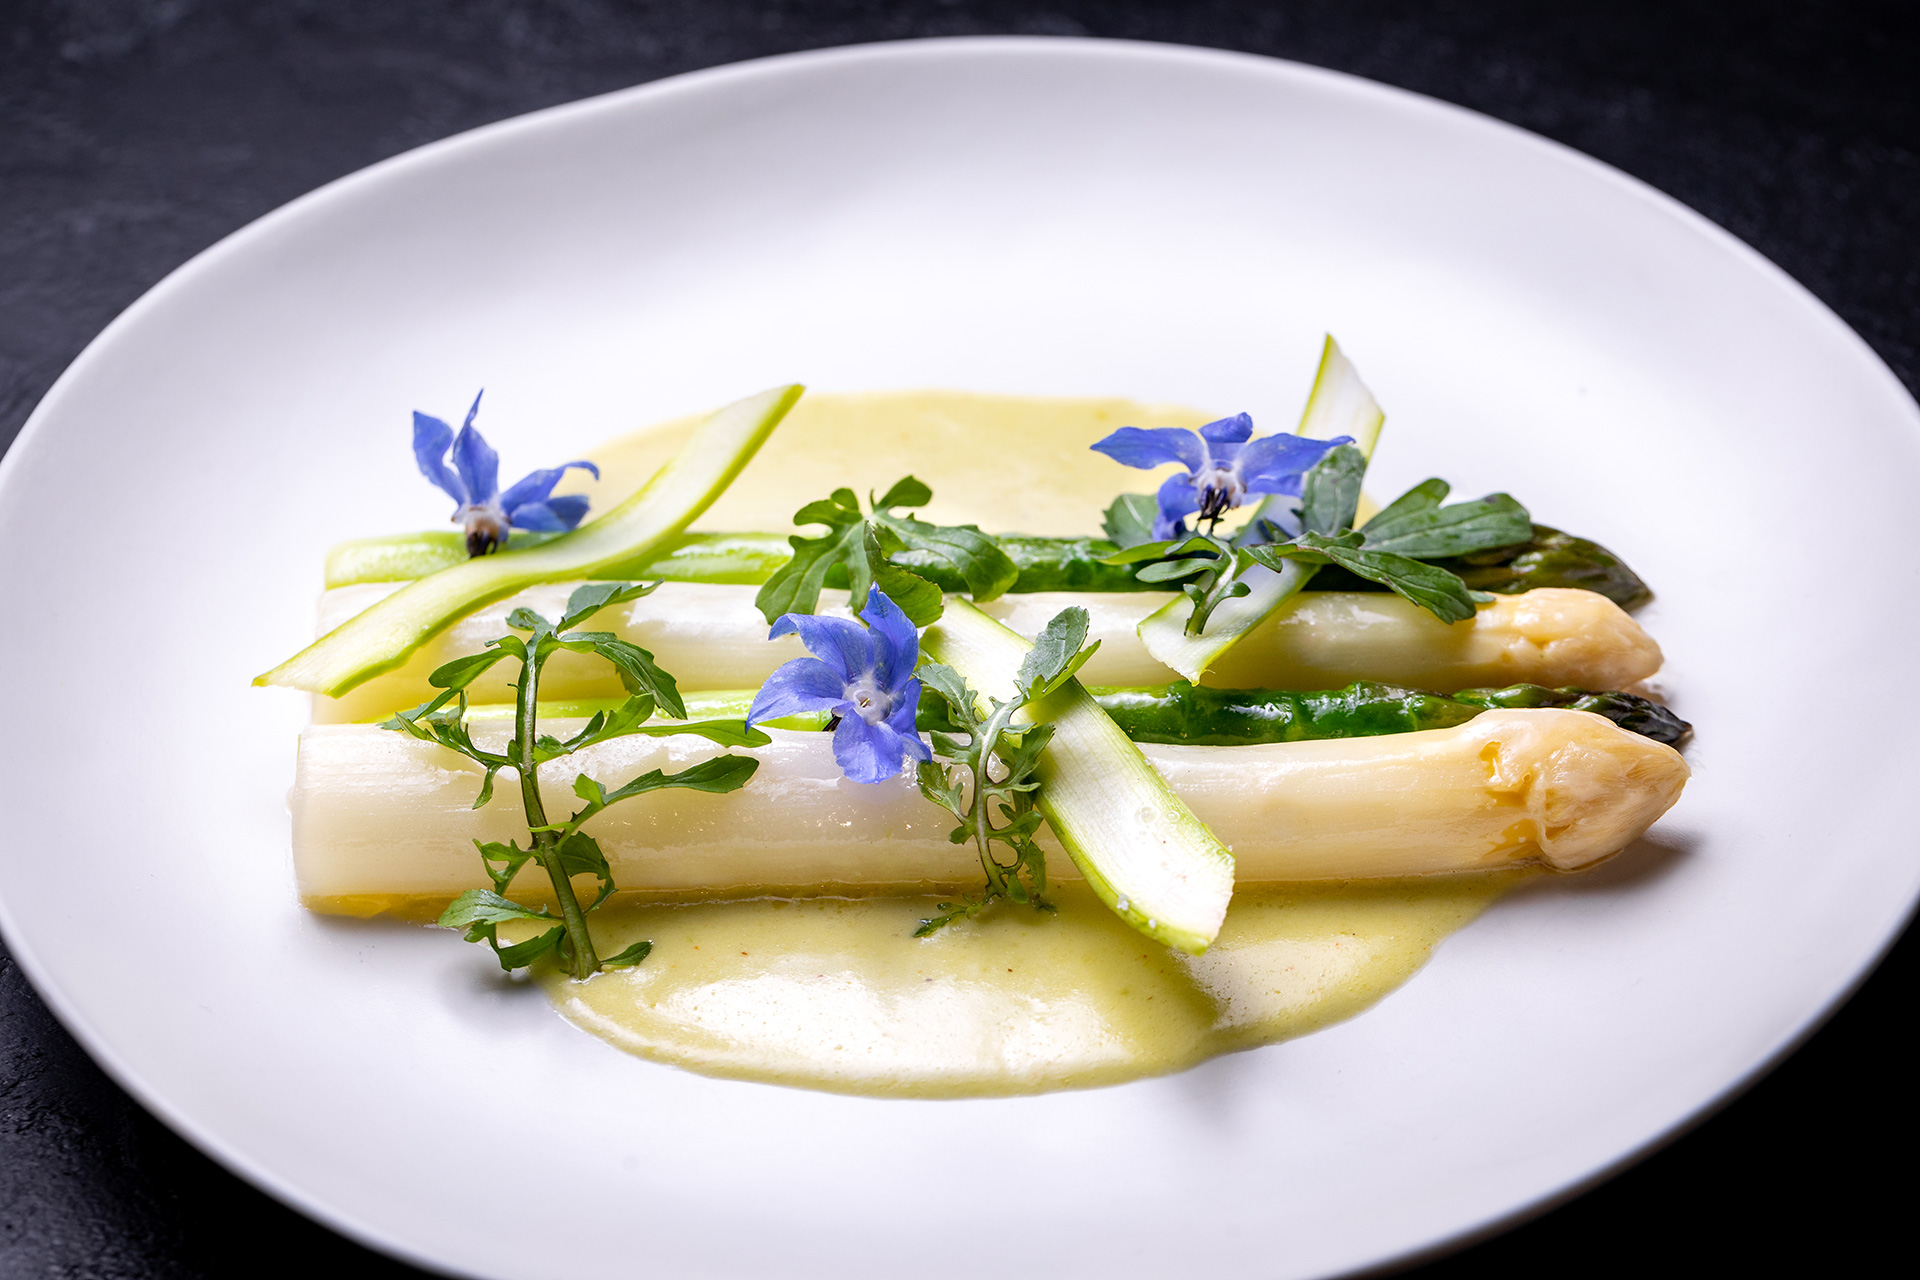 green and white asparagus topped with edible nasturtium flowers